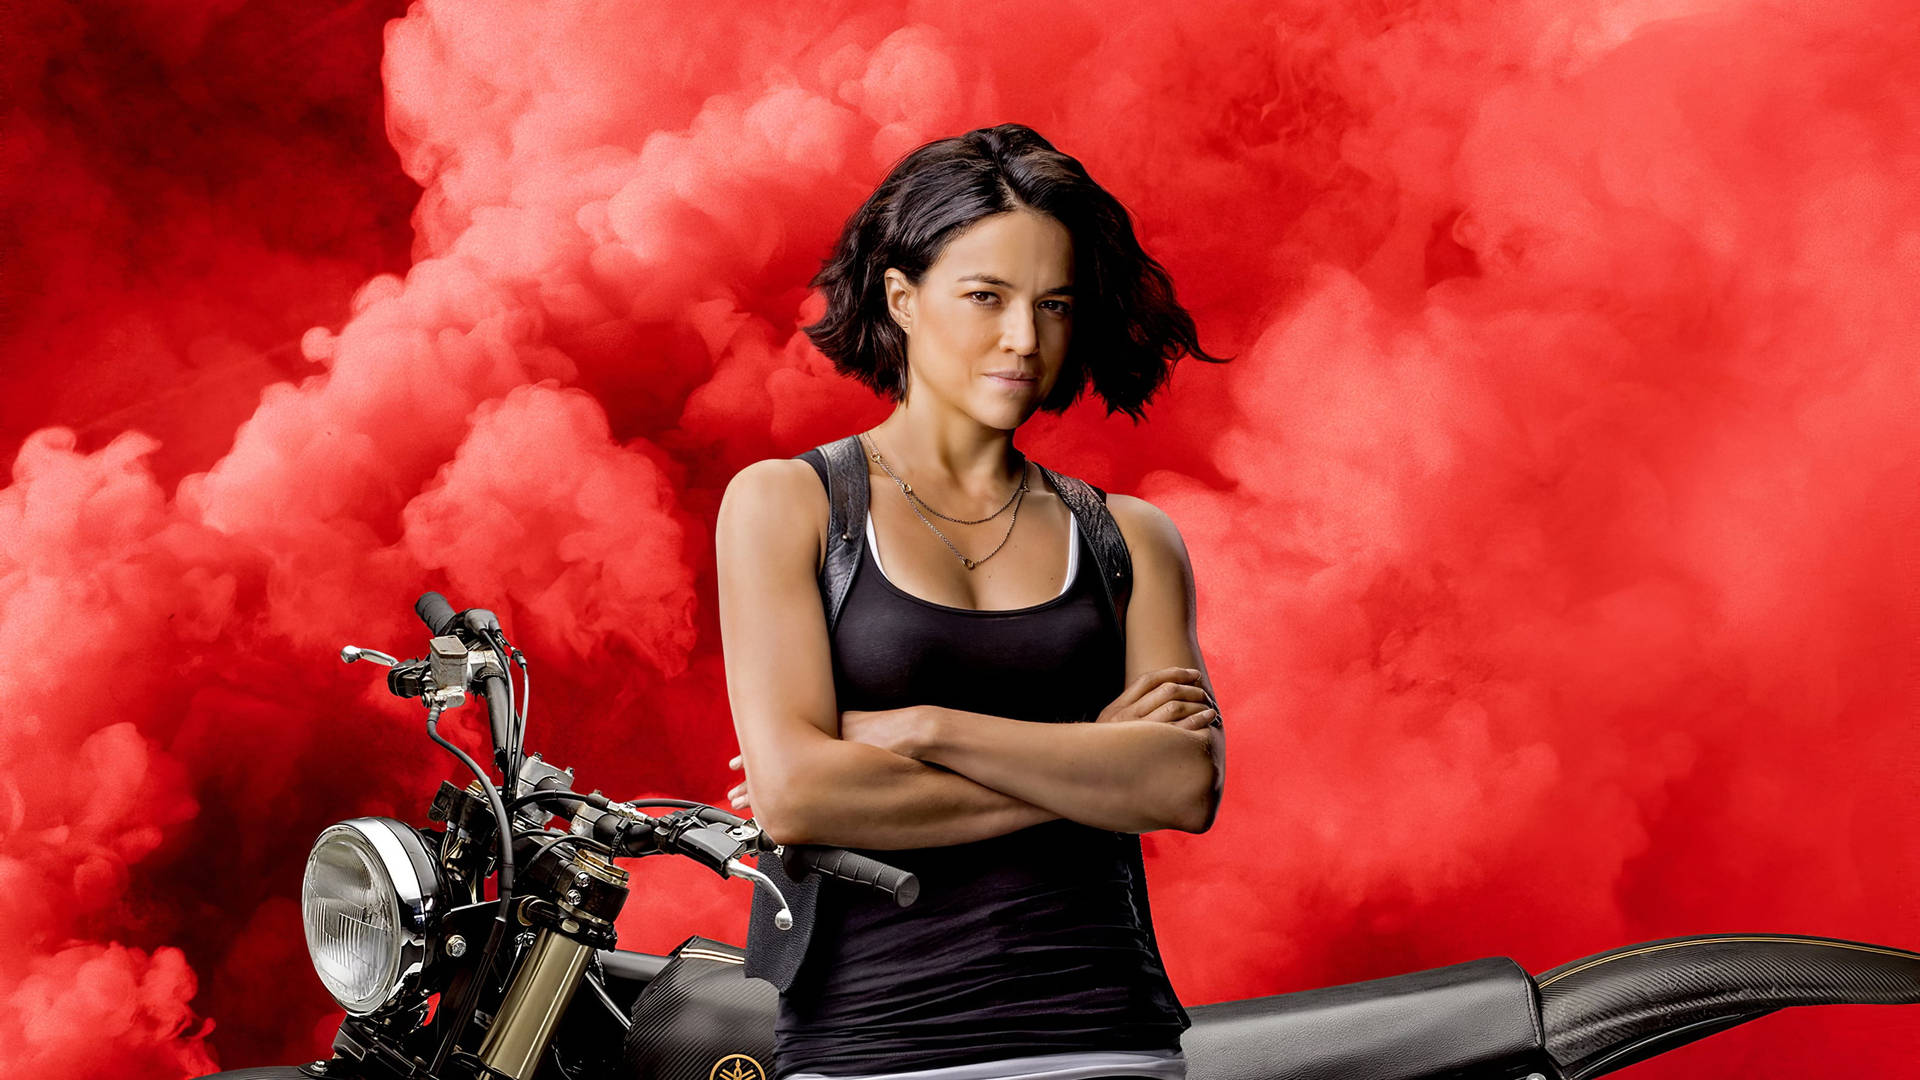 Letty Ortiz, The Fearless Racer From The Fast And Furious Series, Embodied In A Captivating Desktop Image. Background